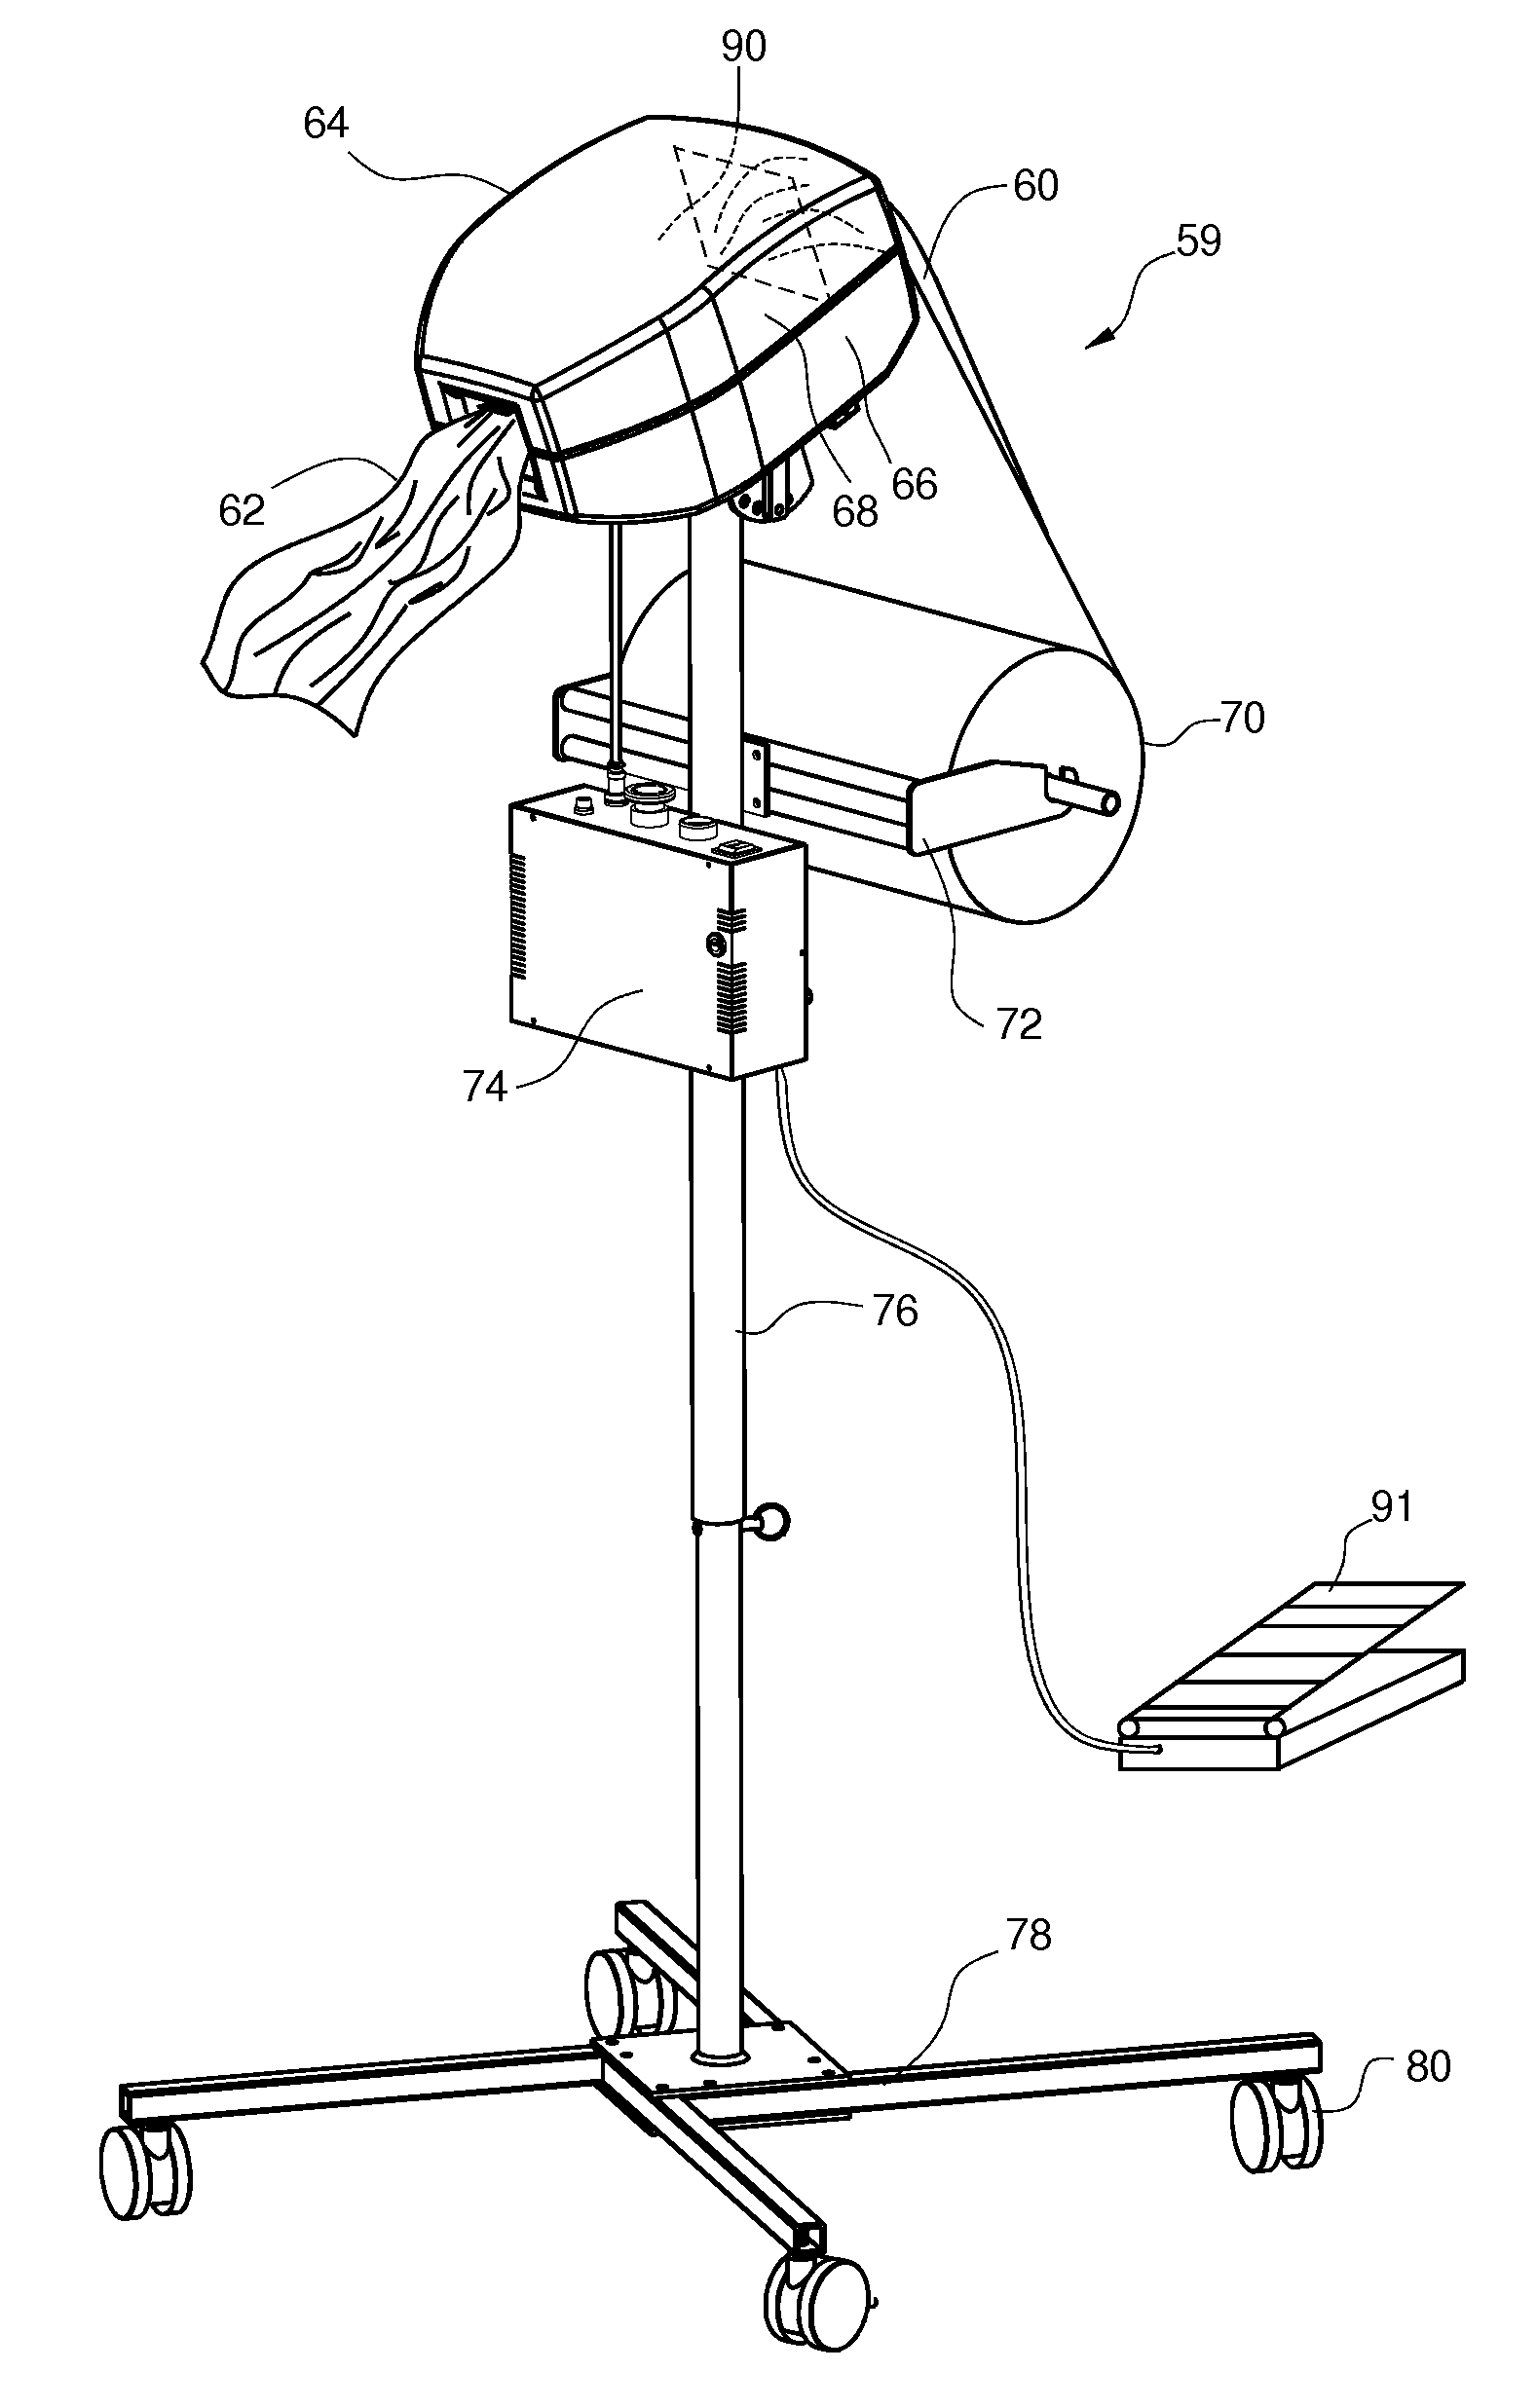 Apparatus, systems and methods for producing cushioning material